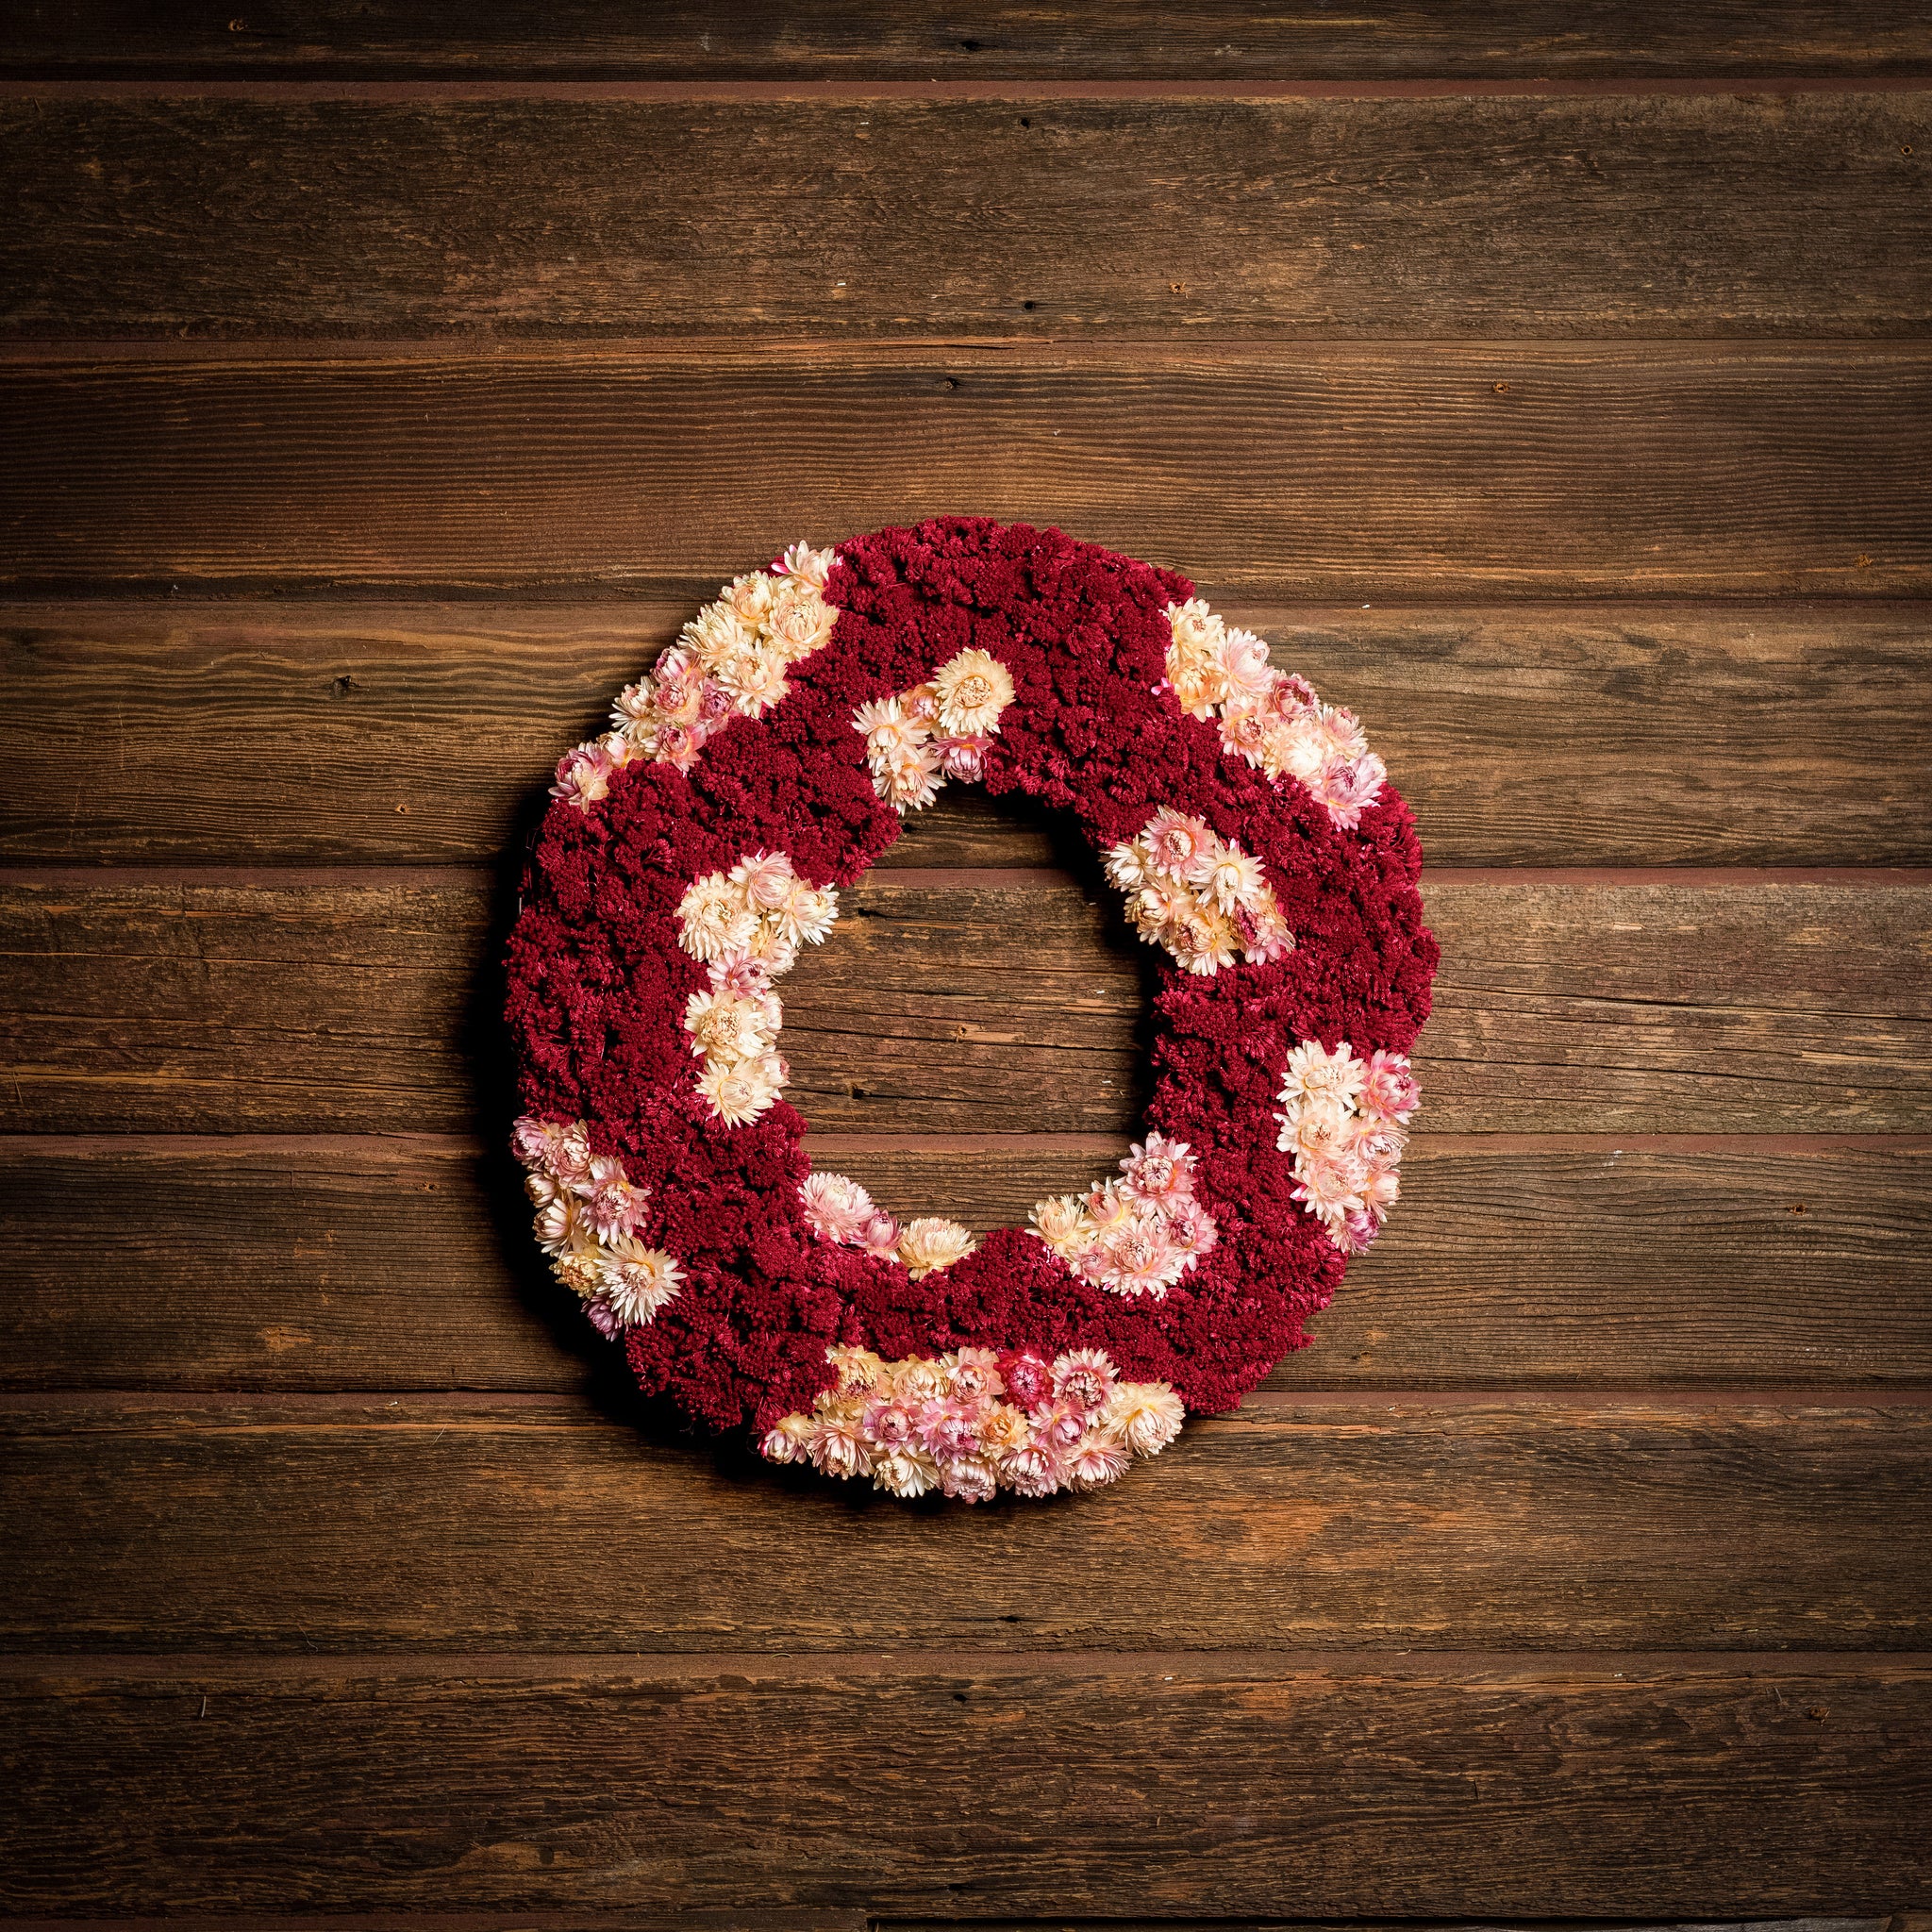 Wreath made of Burgundy-colored ceosia (also called coxcomb) and pale pink strawflowers on a dark wooden background.